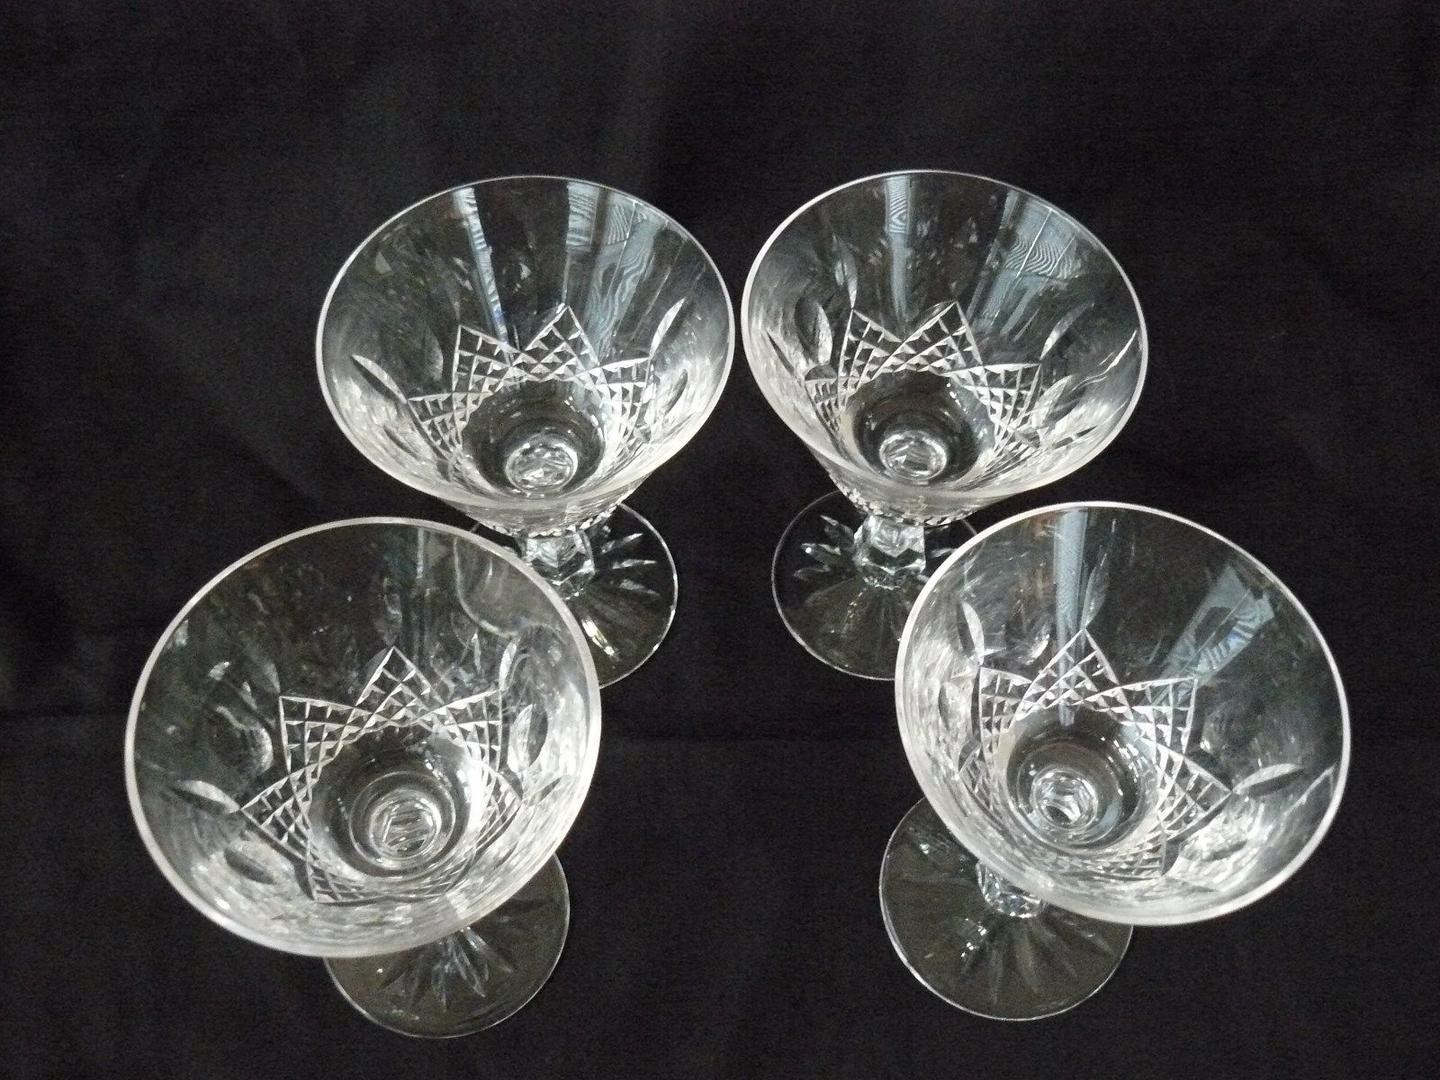 16 Unique Waterford Crystal Vase Price 2024 free download waterford crystal vase price of 4 signed waterford kenmare cut crystal liquor cocktail glasses 4 3 4 with regard to next